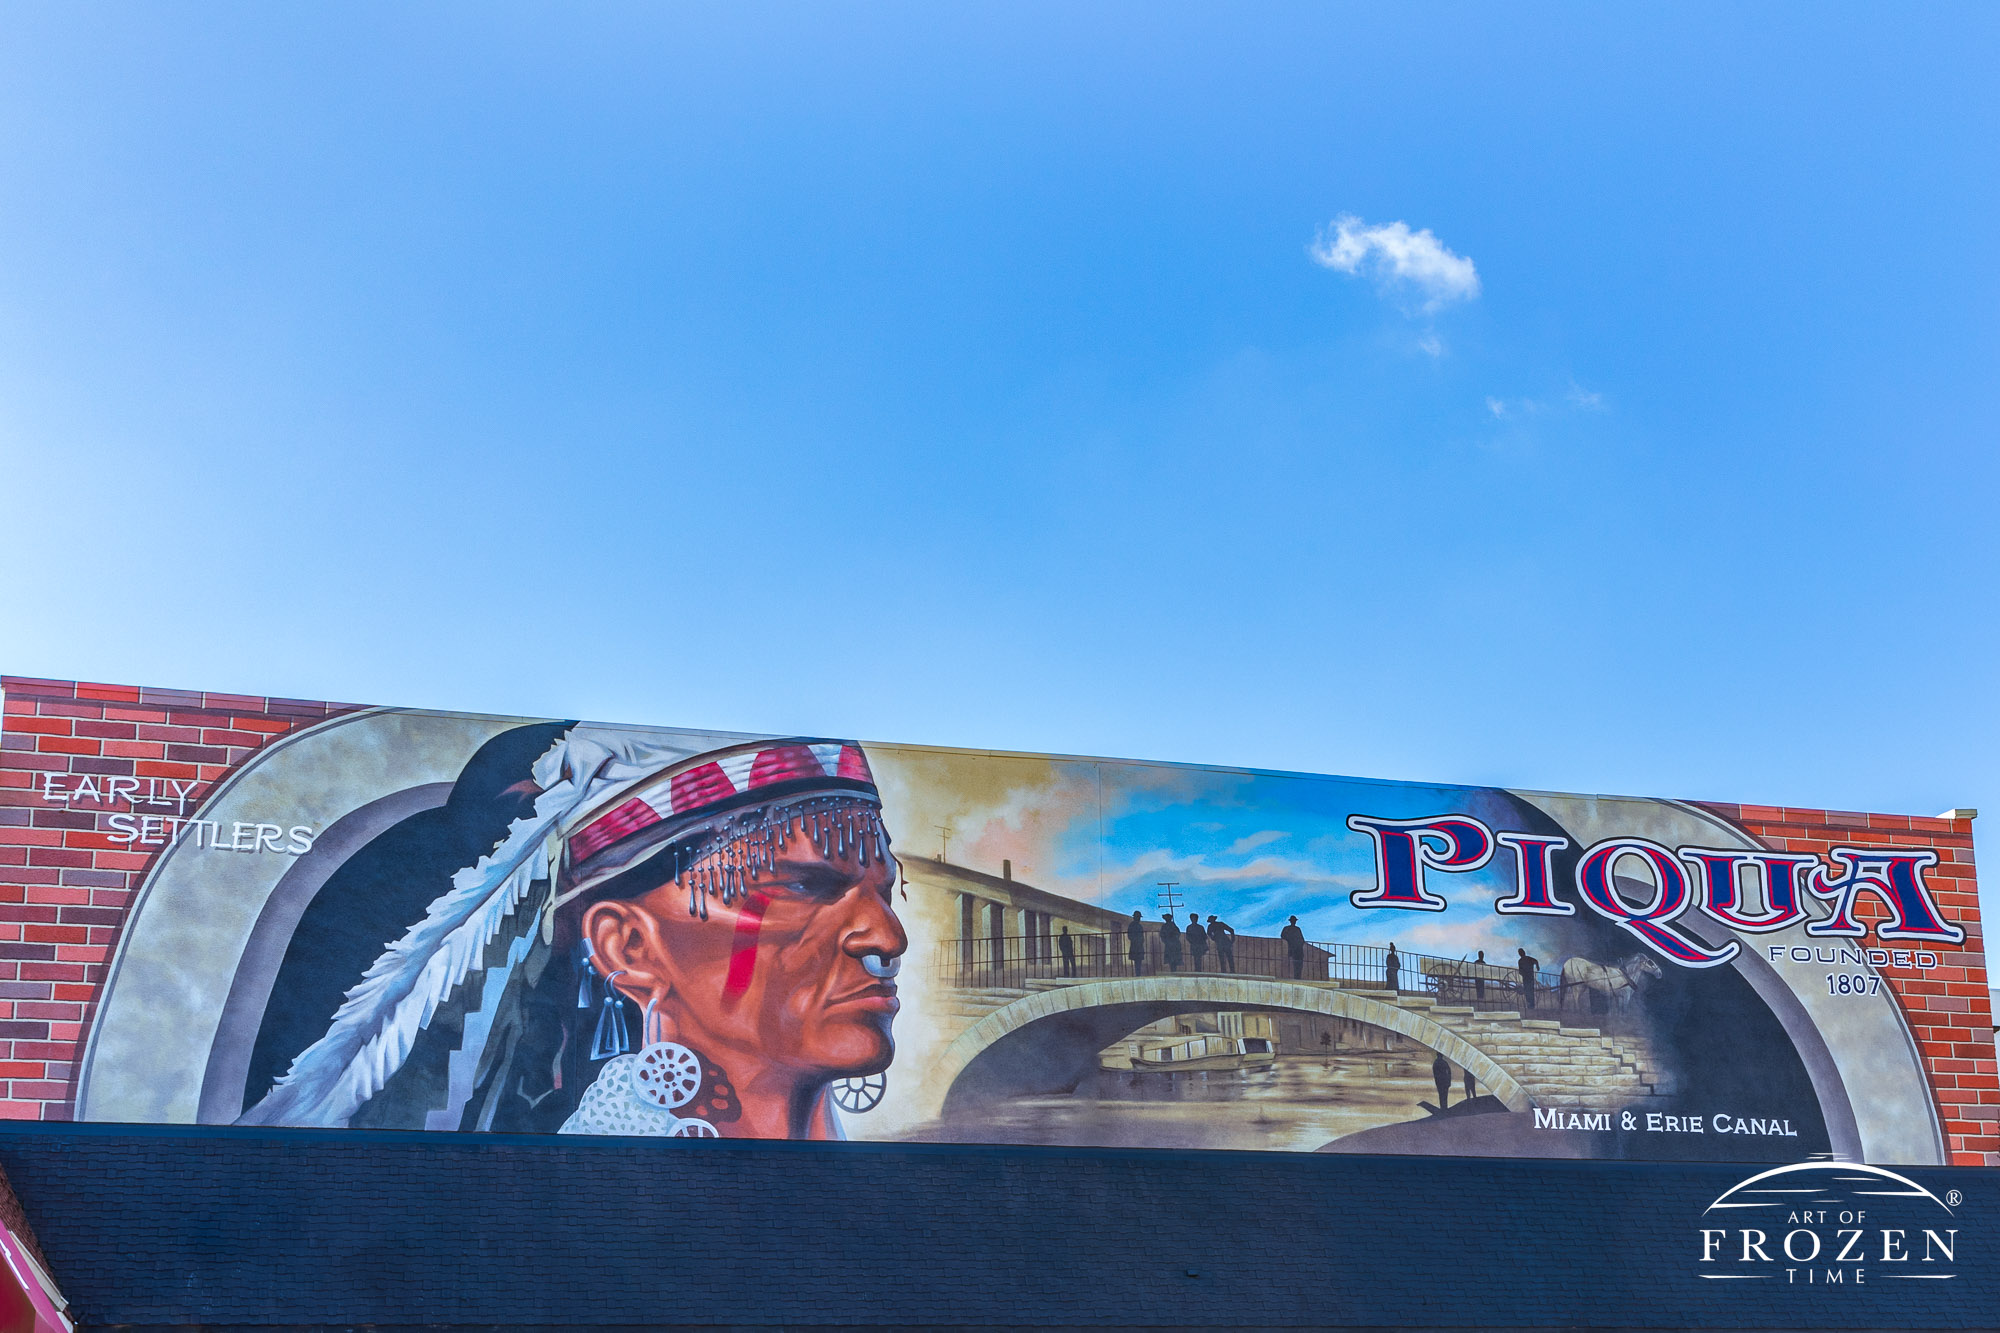 A colorful mural in Piqua Ohio featuring a Native American in ceremonial head wear and the Miami and Erie Canal